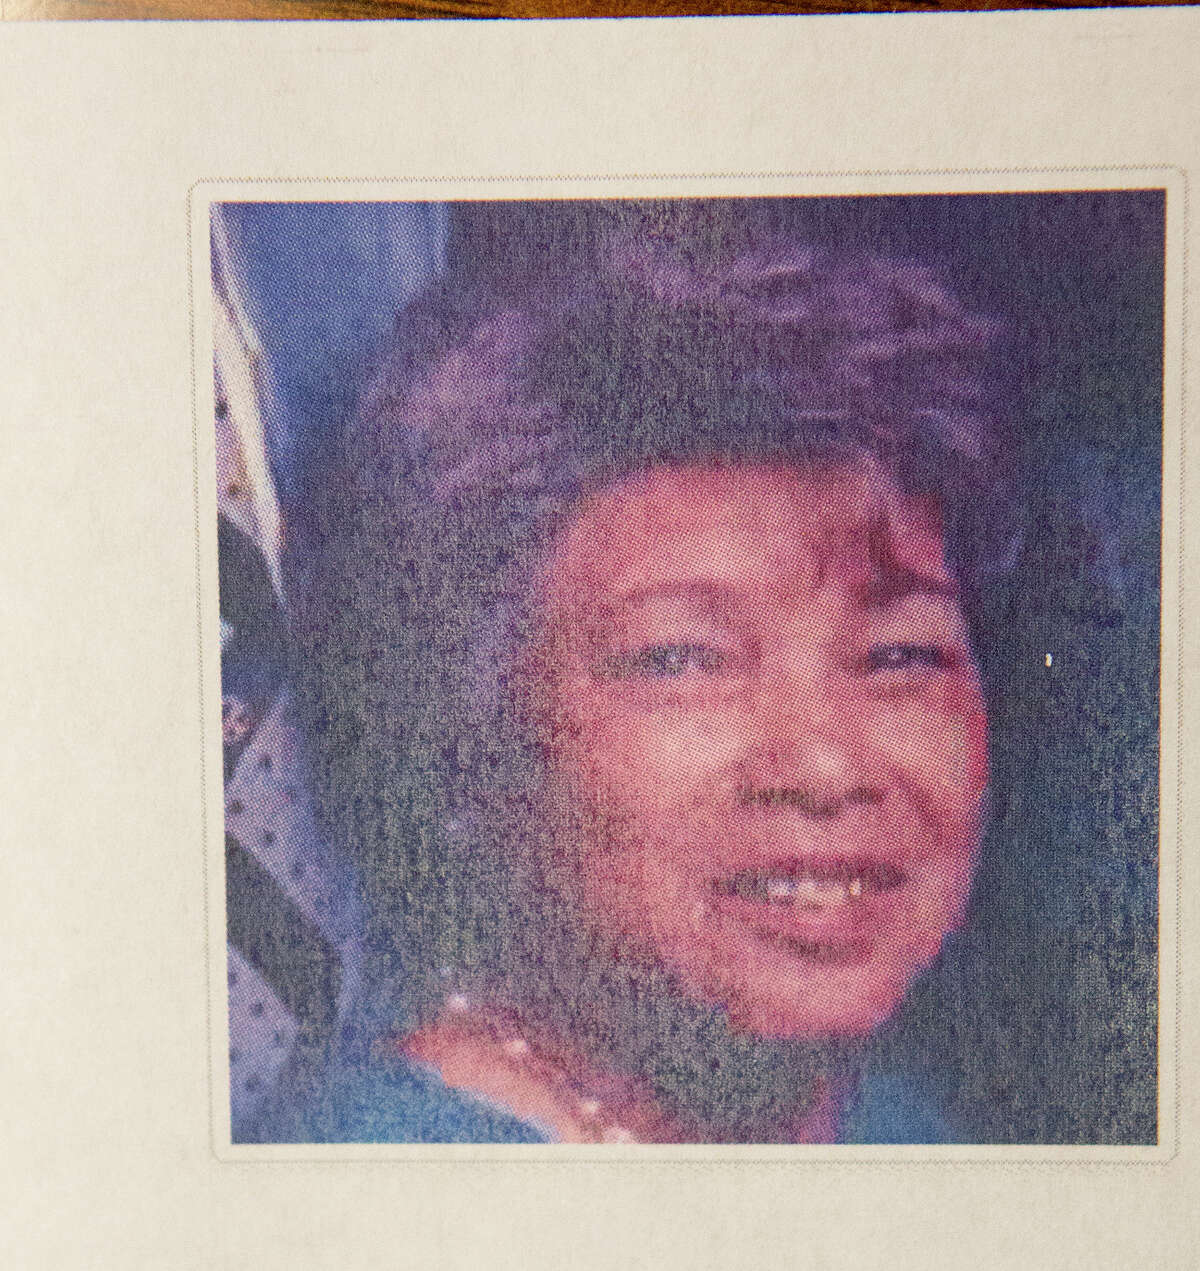 A photo of Pearlie Jean Deason is seen during a press conference, Friday, Aug. 8, 2014, in Houston. Mabrie Memorial Mortuary mixed up the deceased bodies of two Houston mothers, Edna L. Lawson and Deason and buried Deason's body in Lawson's cemetery plot at the VA cemetery on top of the body of Lawson's deceased husband, a World War II Veteran. Lawson passed away on July 19, 2014 and Mrs. Deason passed away on July 22, 2014. (Cody Duty / Houston Chronicle)